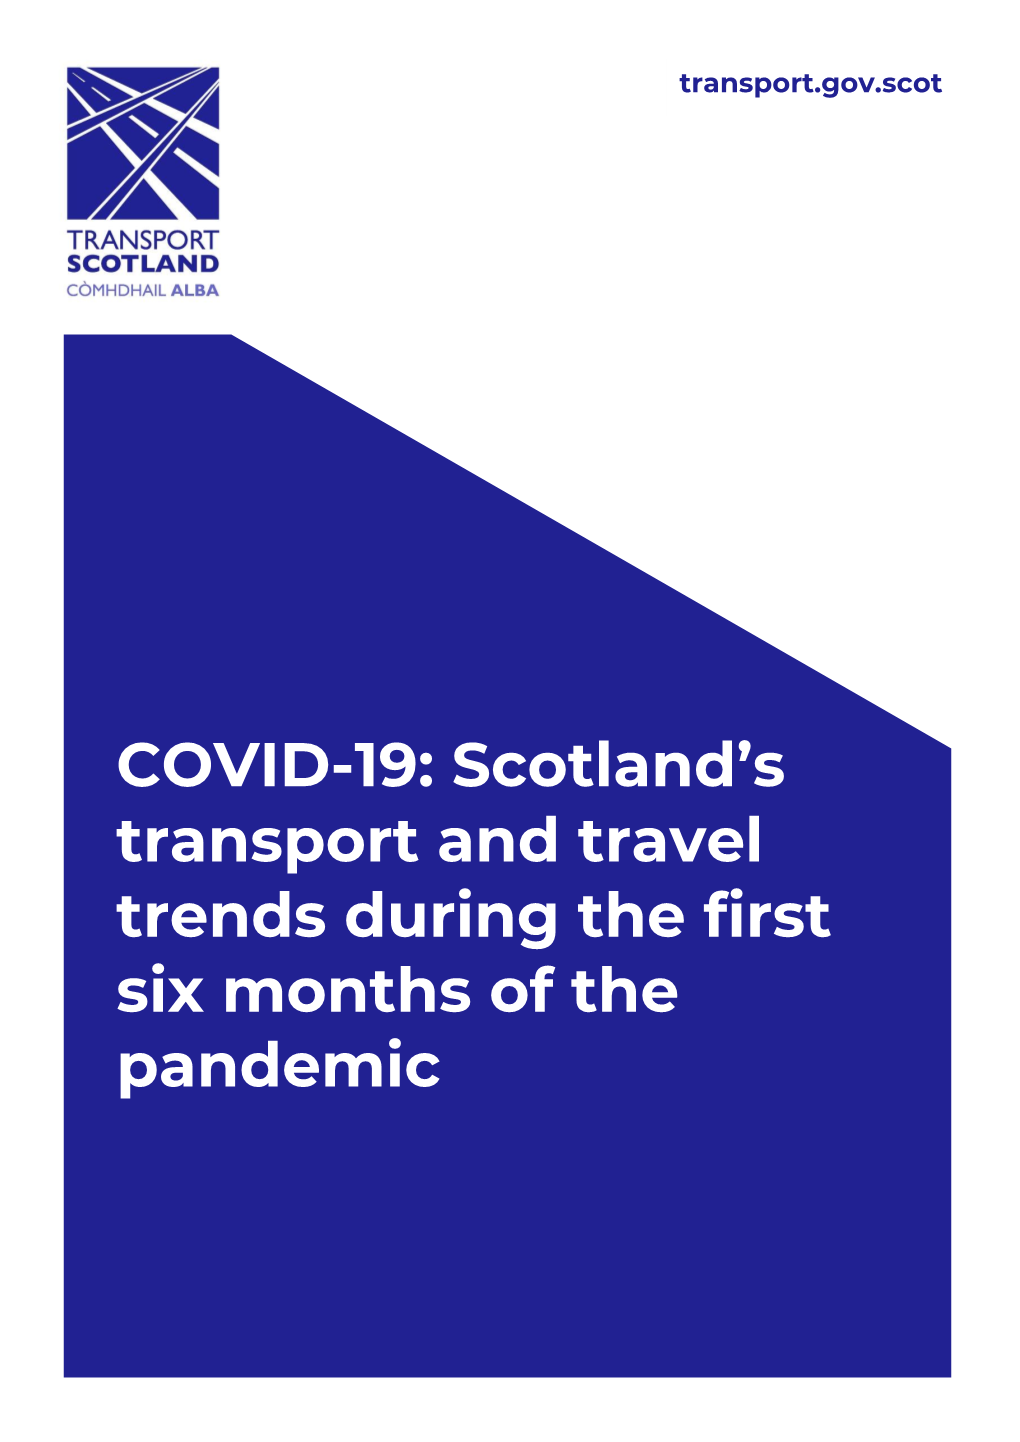 COVID-19: Scotland's Transport and Travel Trends